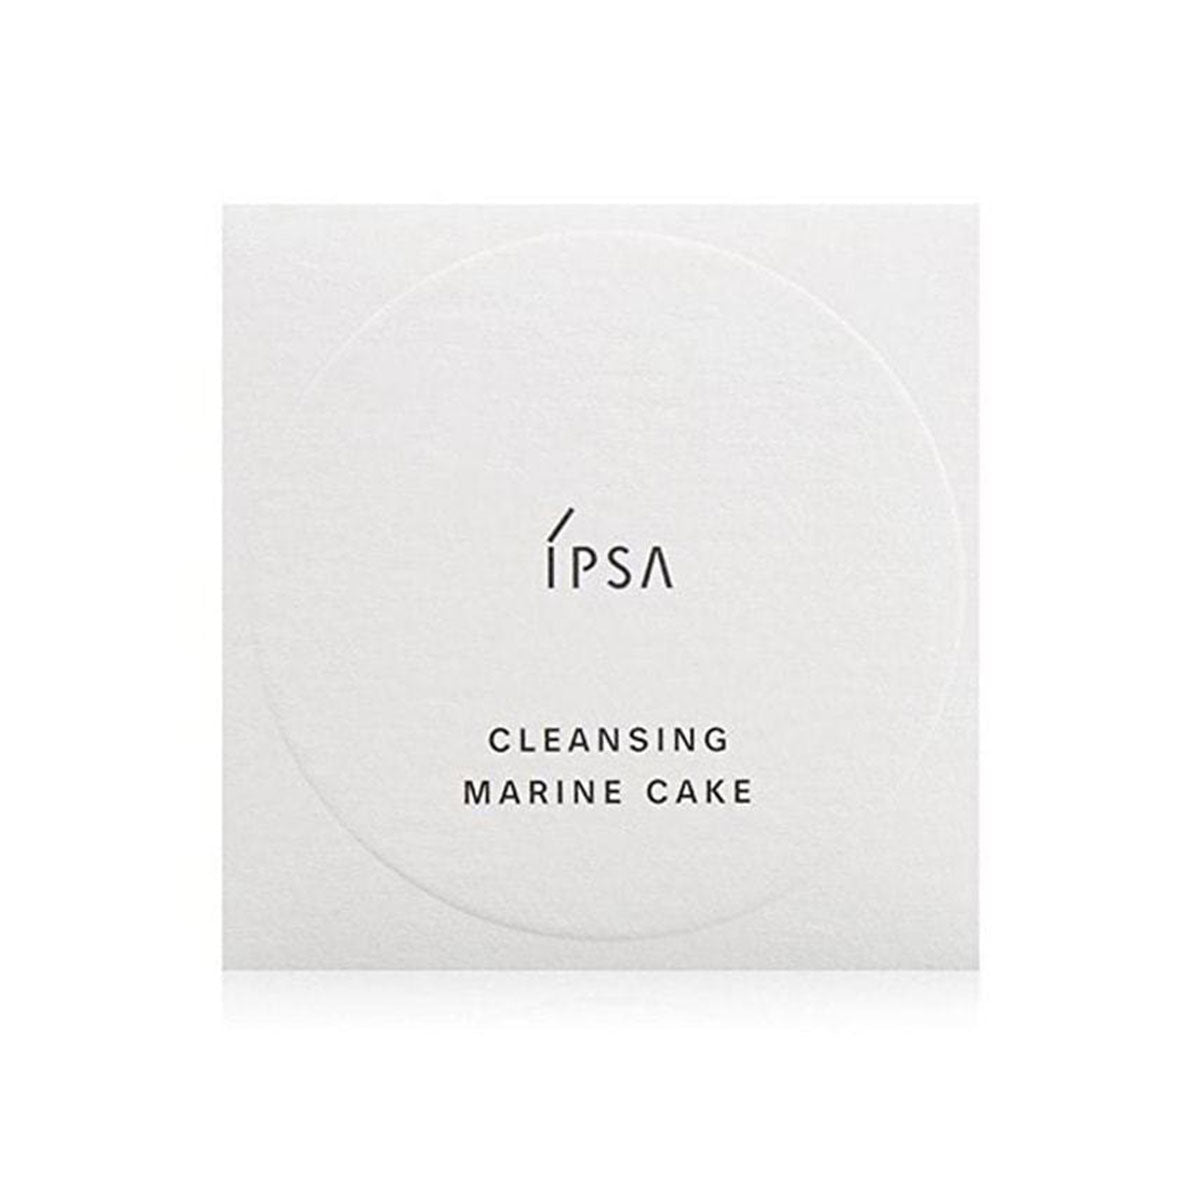 Cleansing Marine Cake Face Soap 100g